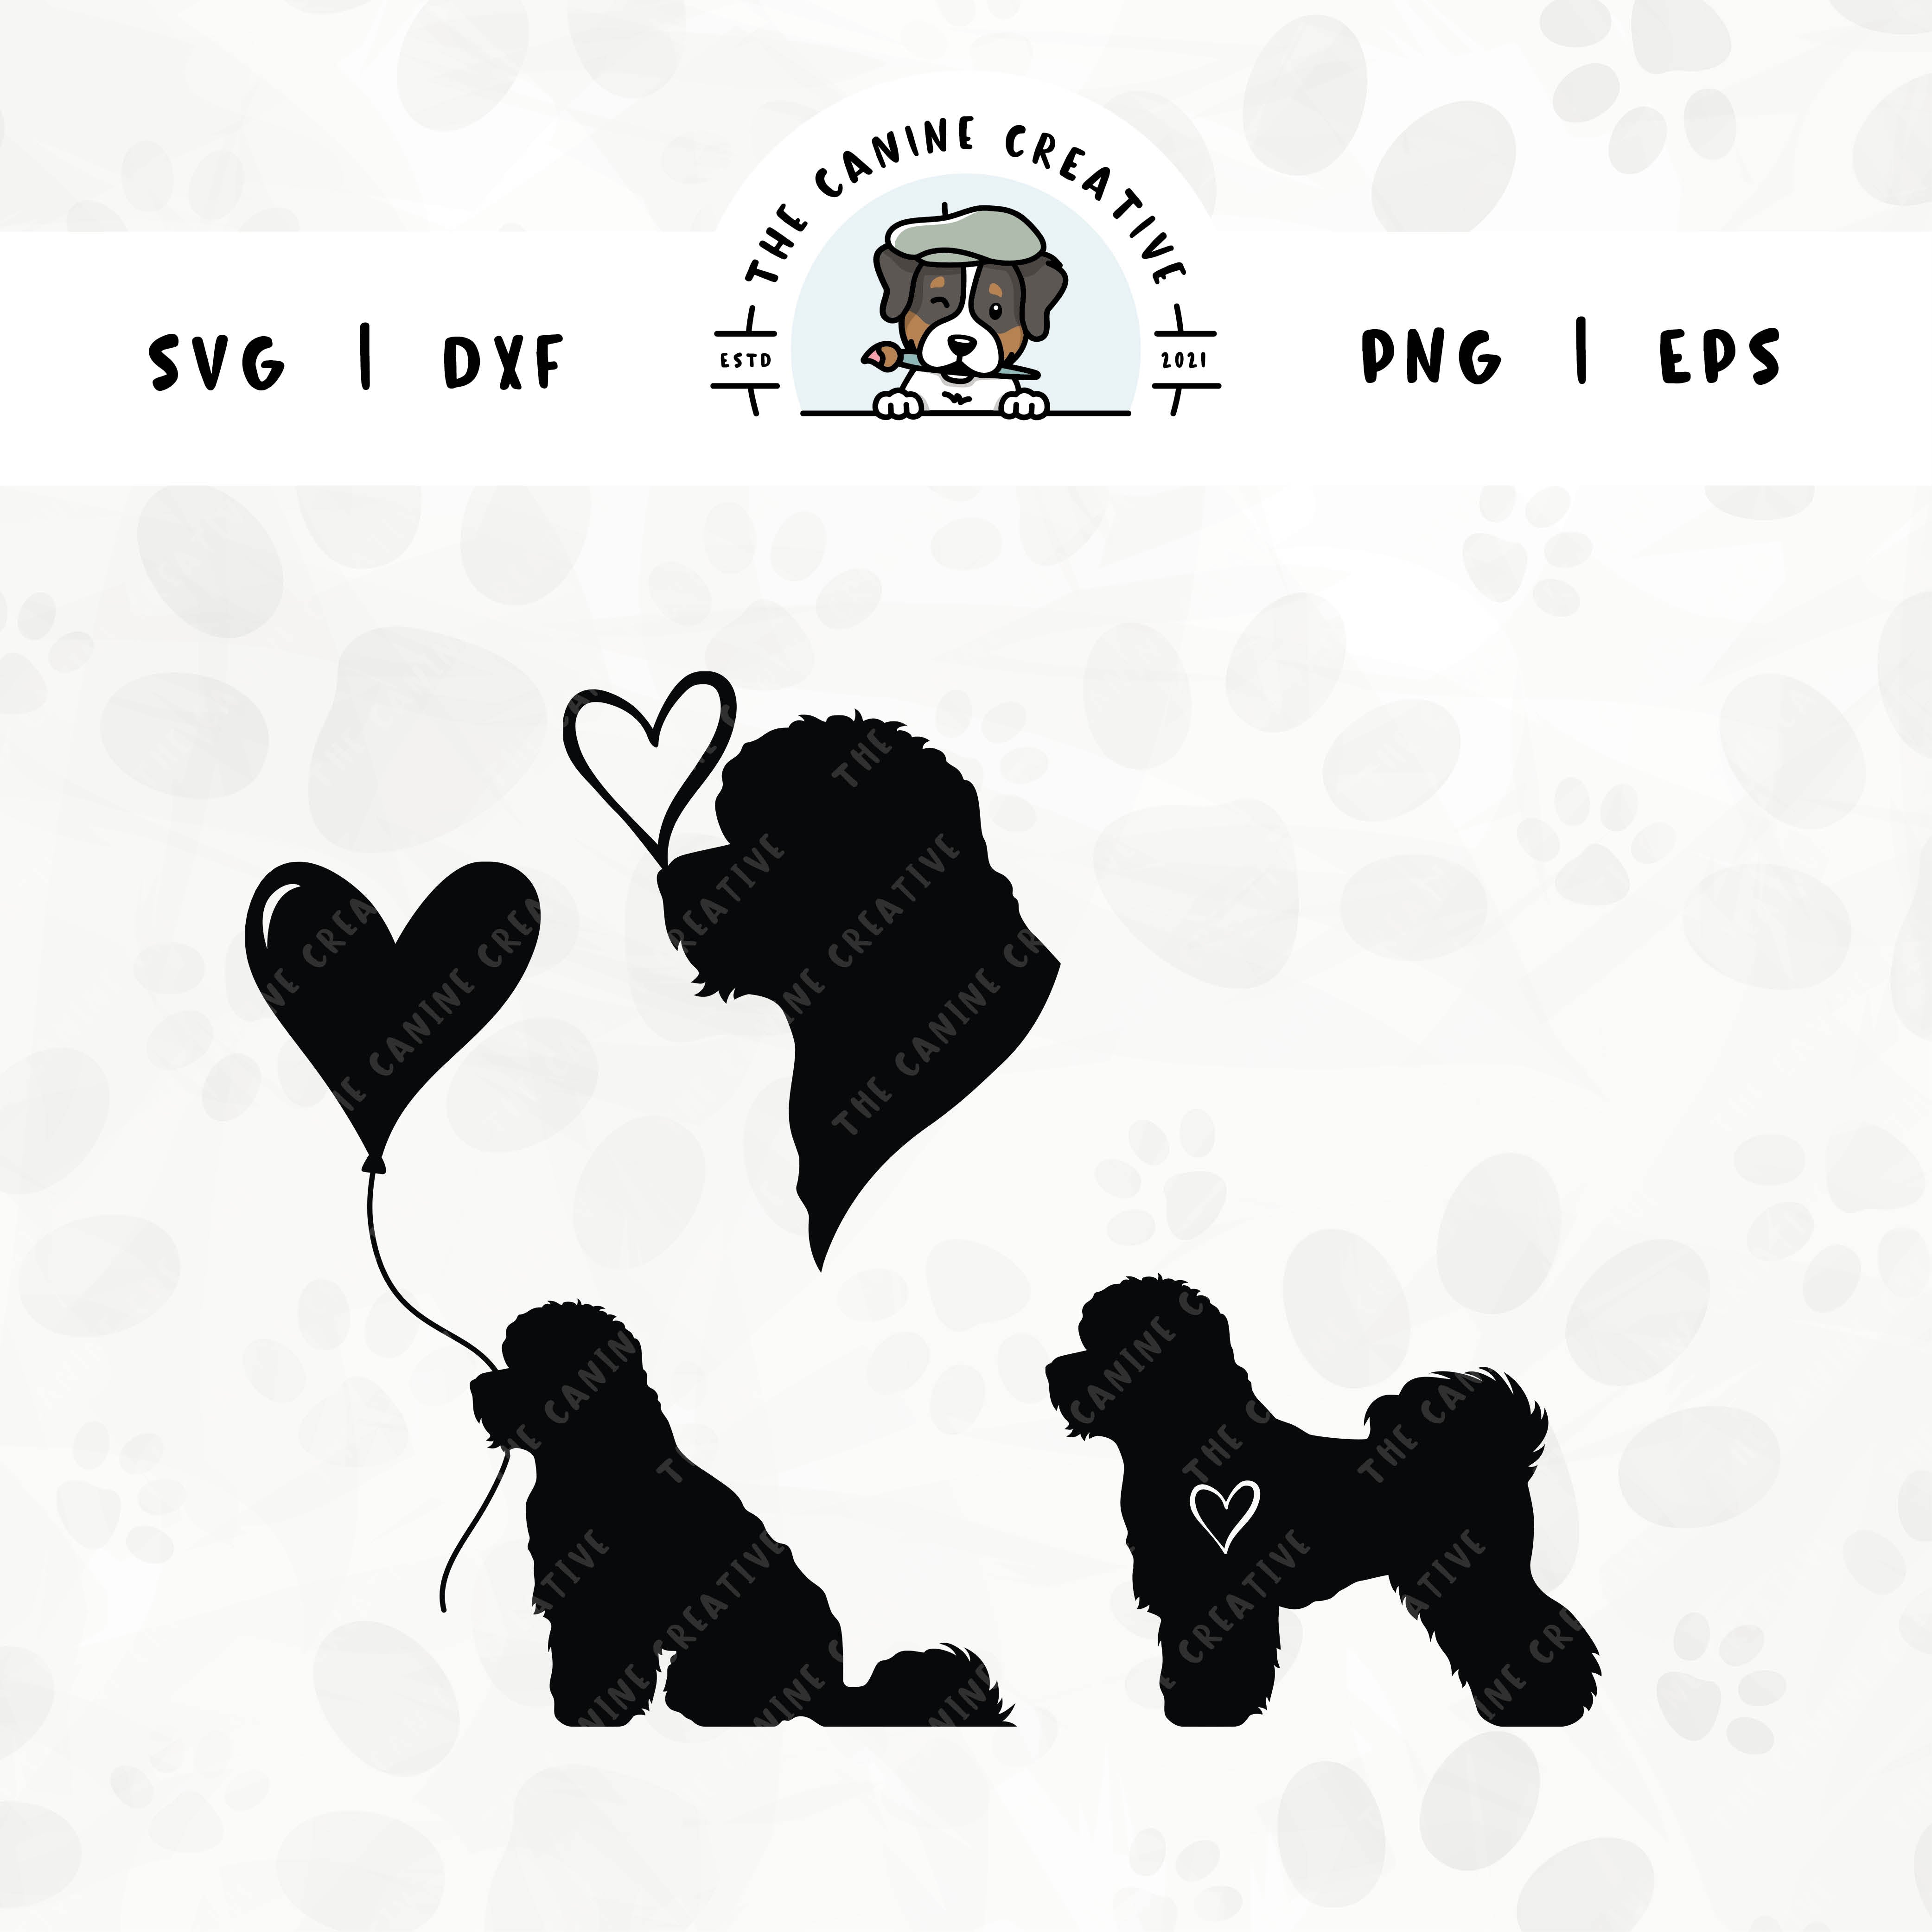 This 3-pack Bichon Frise silhouette bundle features a head portrait of a dog with a heart perched atop it’s nose, a sitting dog holding a heart balloon, and a standing profile of a dog with a heart inset. File formats include: SVG, DXF, PNG, and EPS.